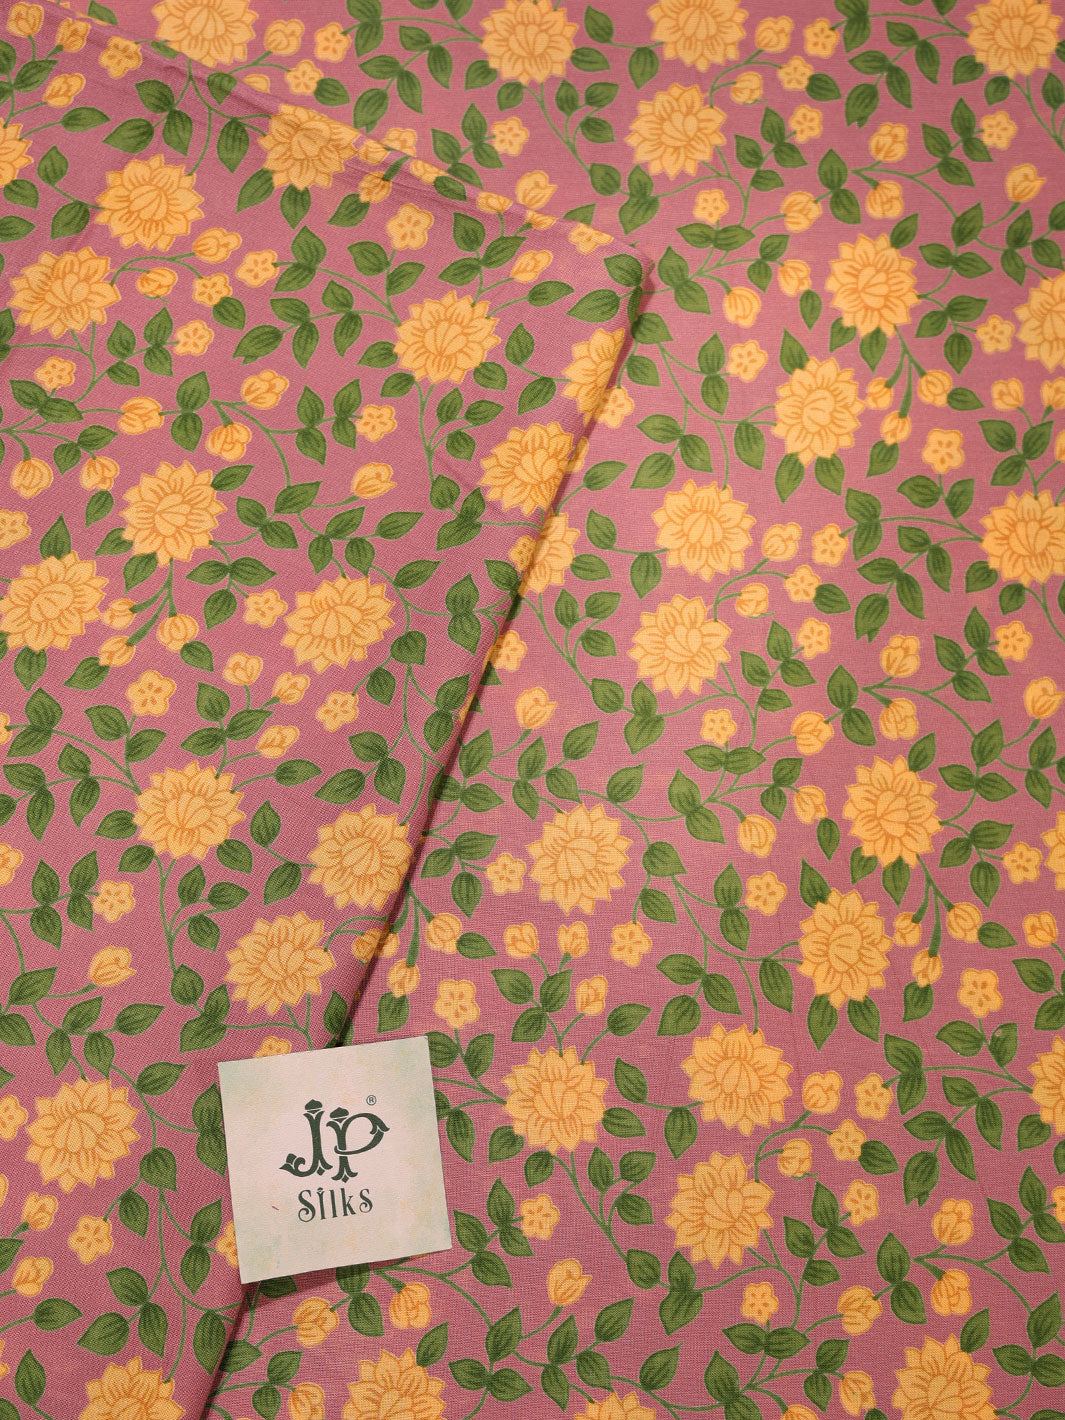 Rose Pink and Yellow Cotton Fabric - A7950 - View 2